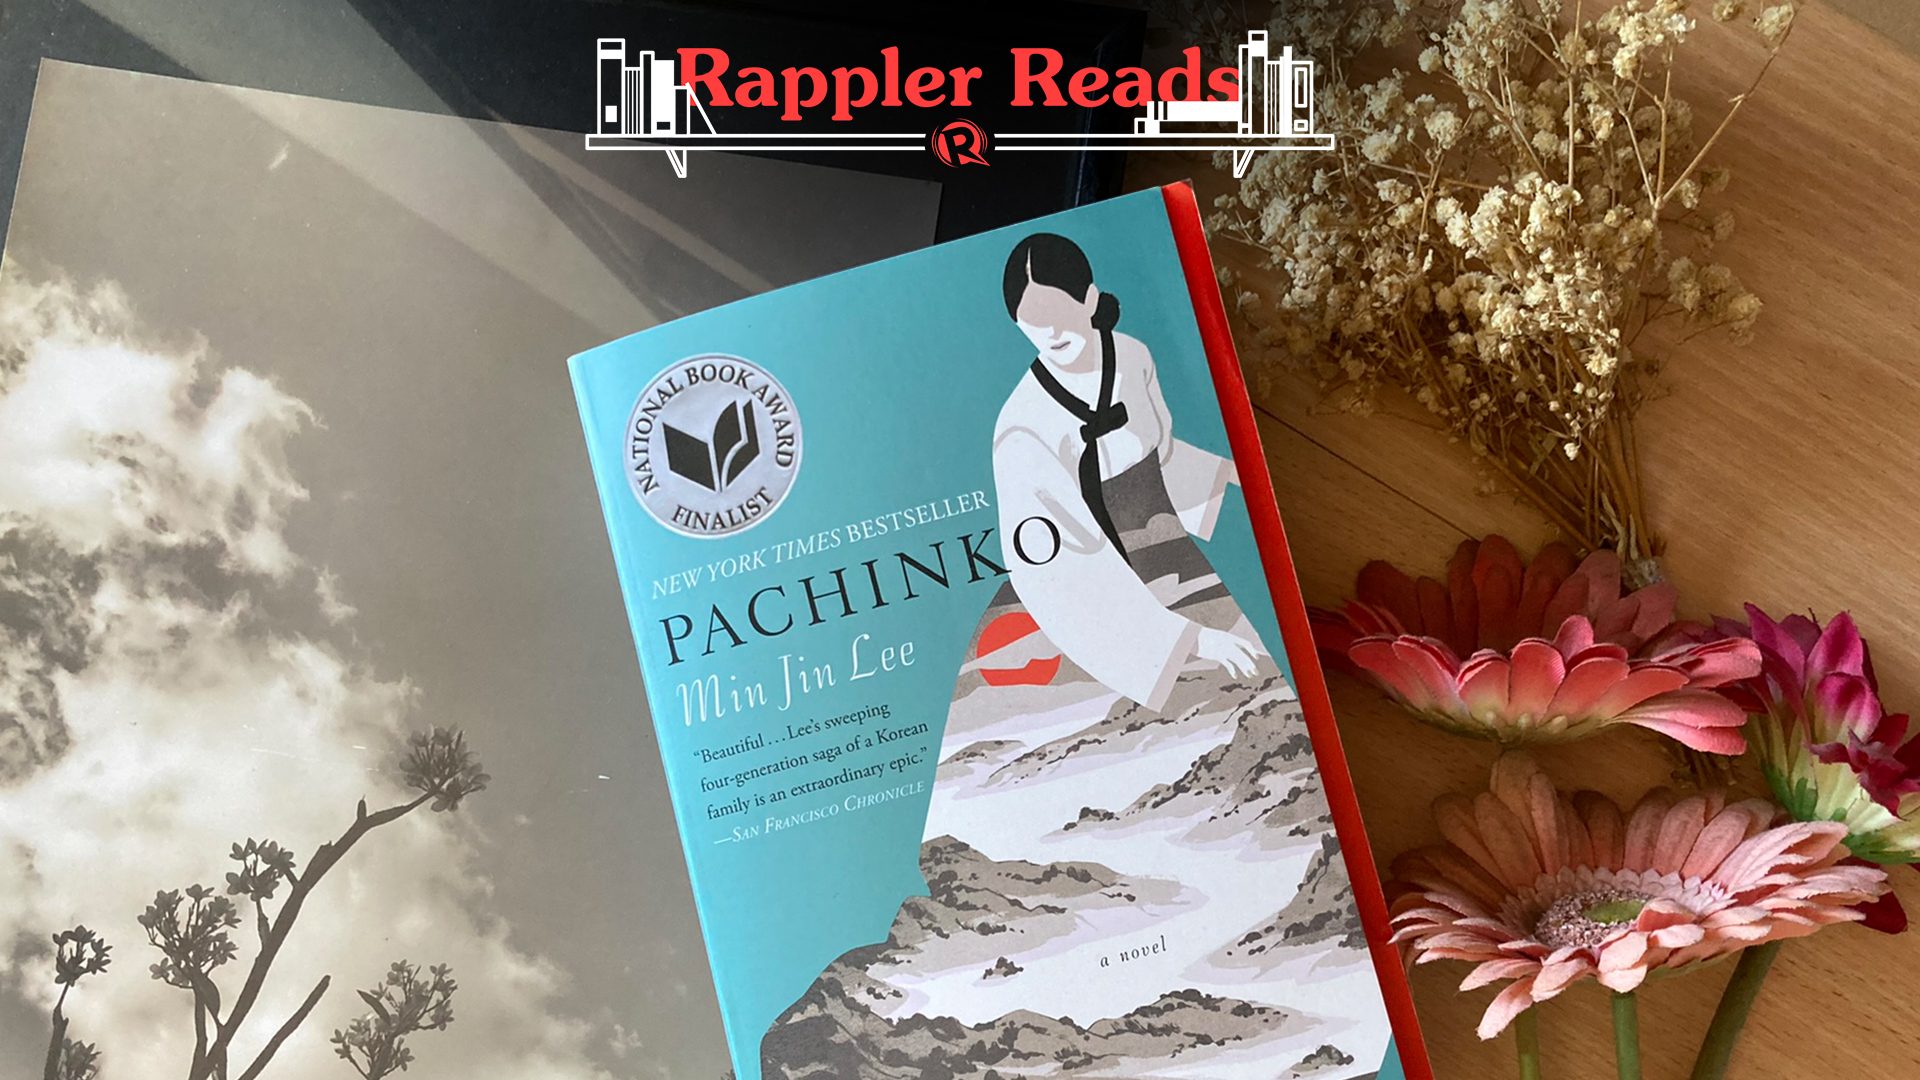 [#RapplerReads] In Pachinko, does a mother’s love surpass struggles of war and tainted identity?